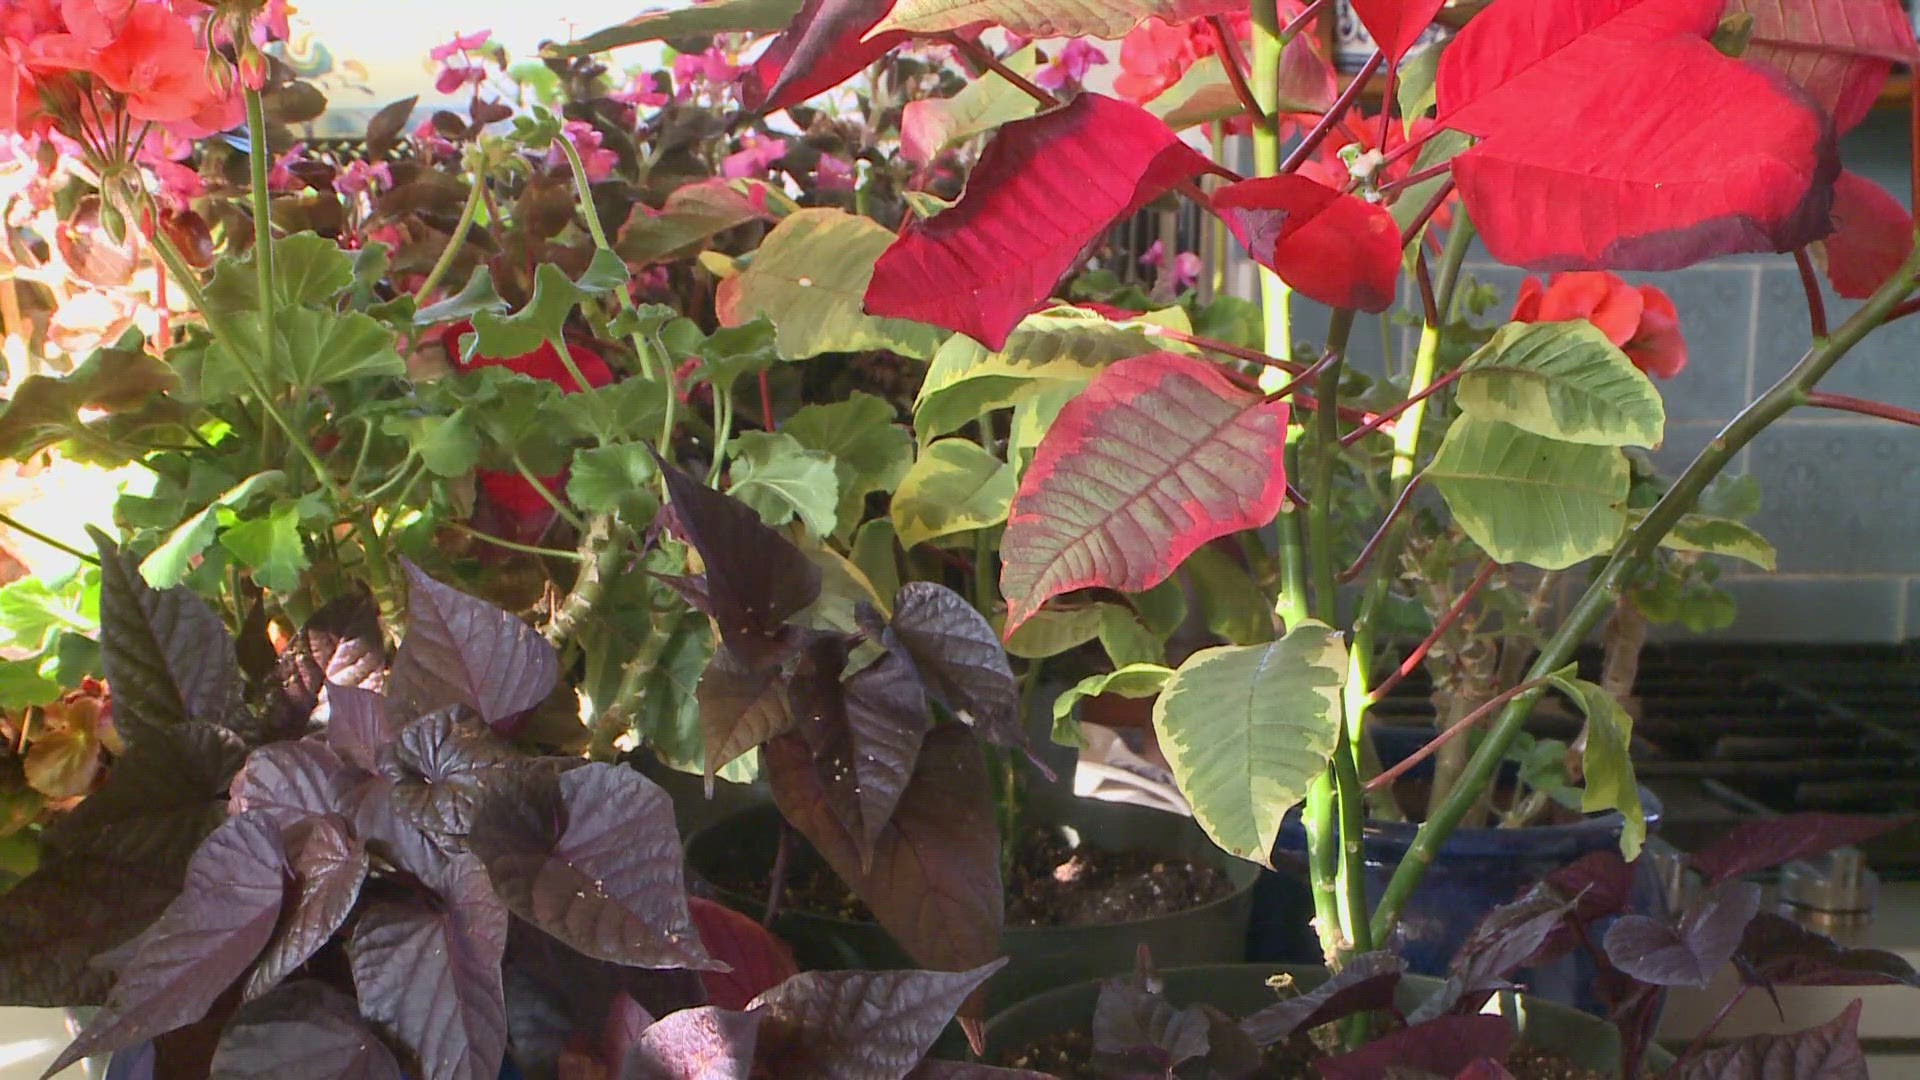 Your holiday poinsettias will make a great addition to your late spring garden.